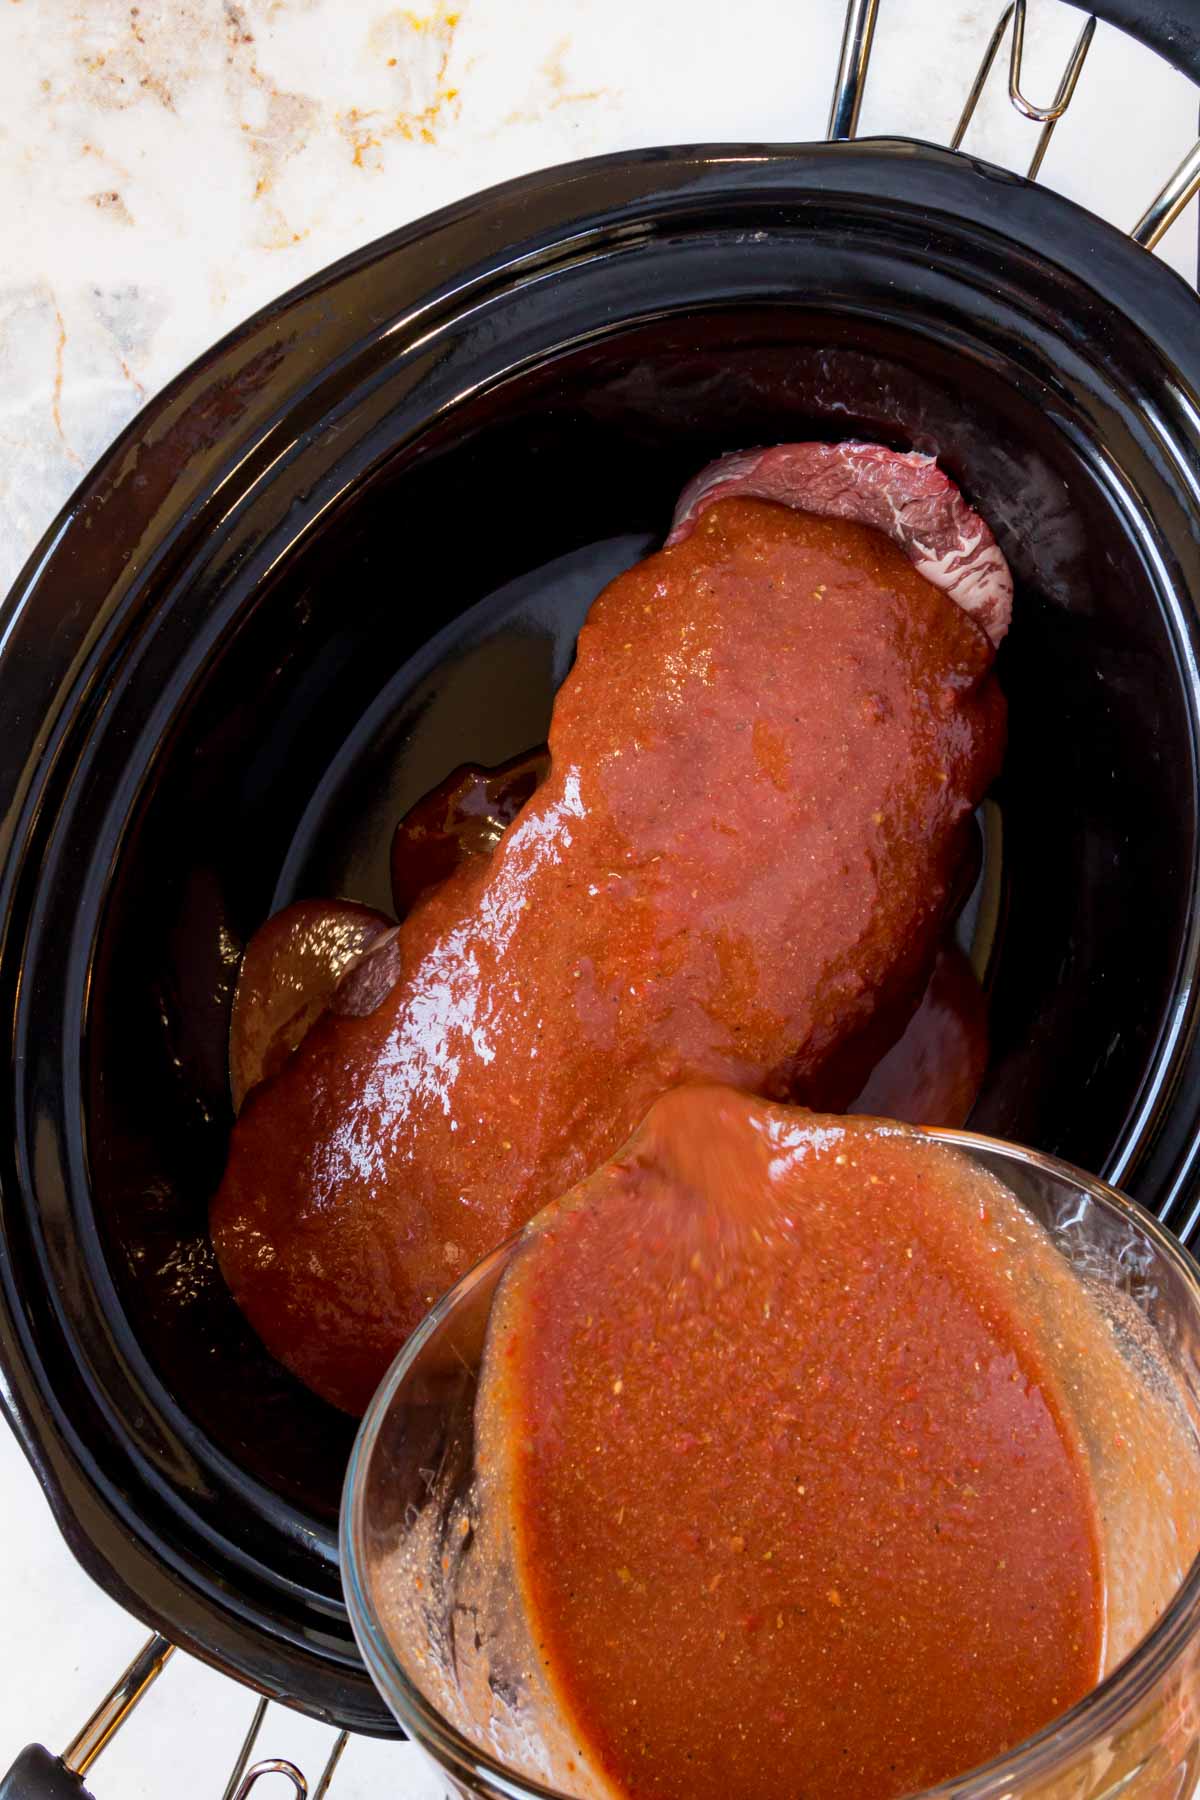 BBQ sauce is poured over beef chuck roast in the bowl of a crockpot.